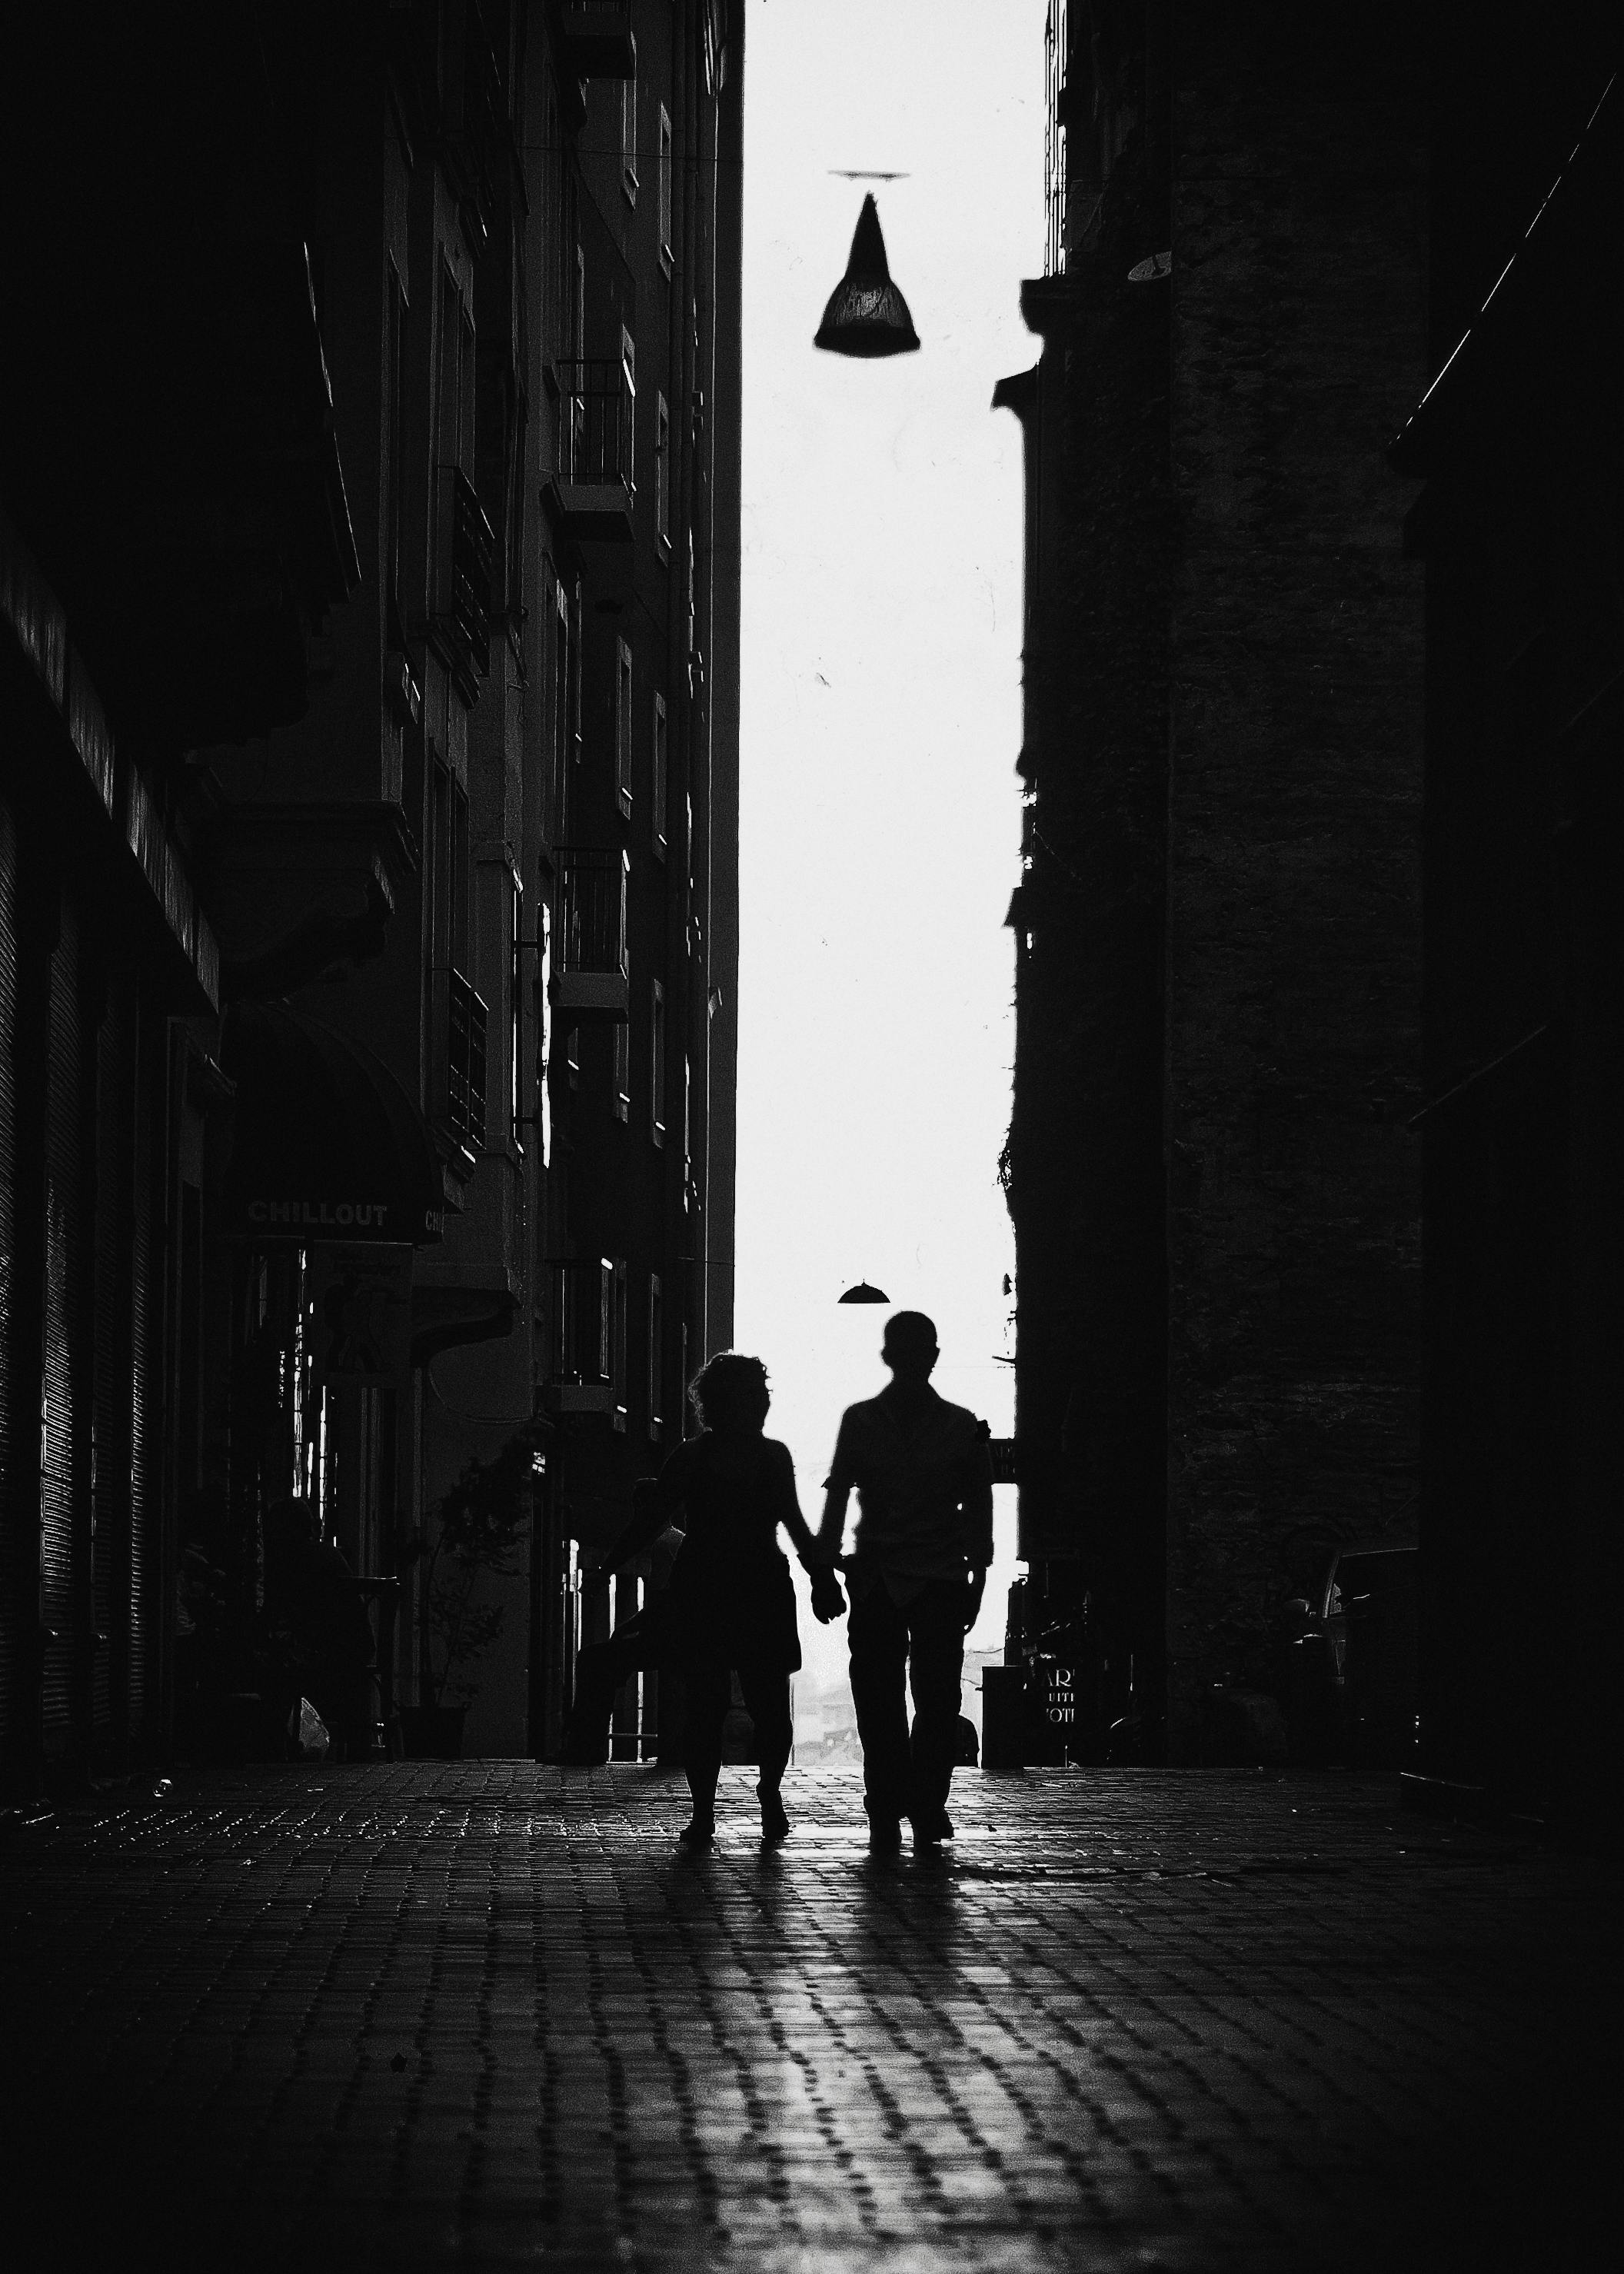 Free Photo Of Man And Woman Walking In Alley Stock Photo